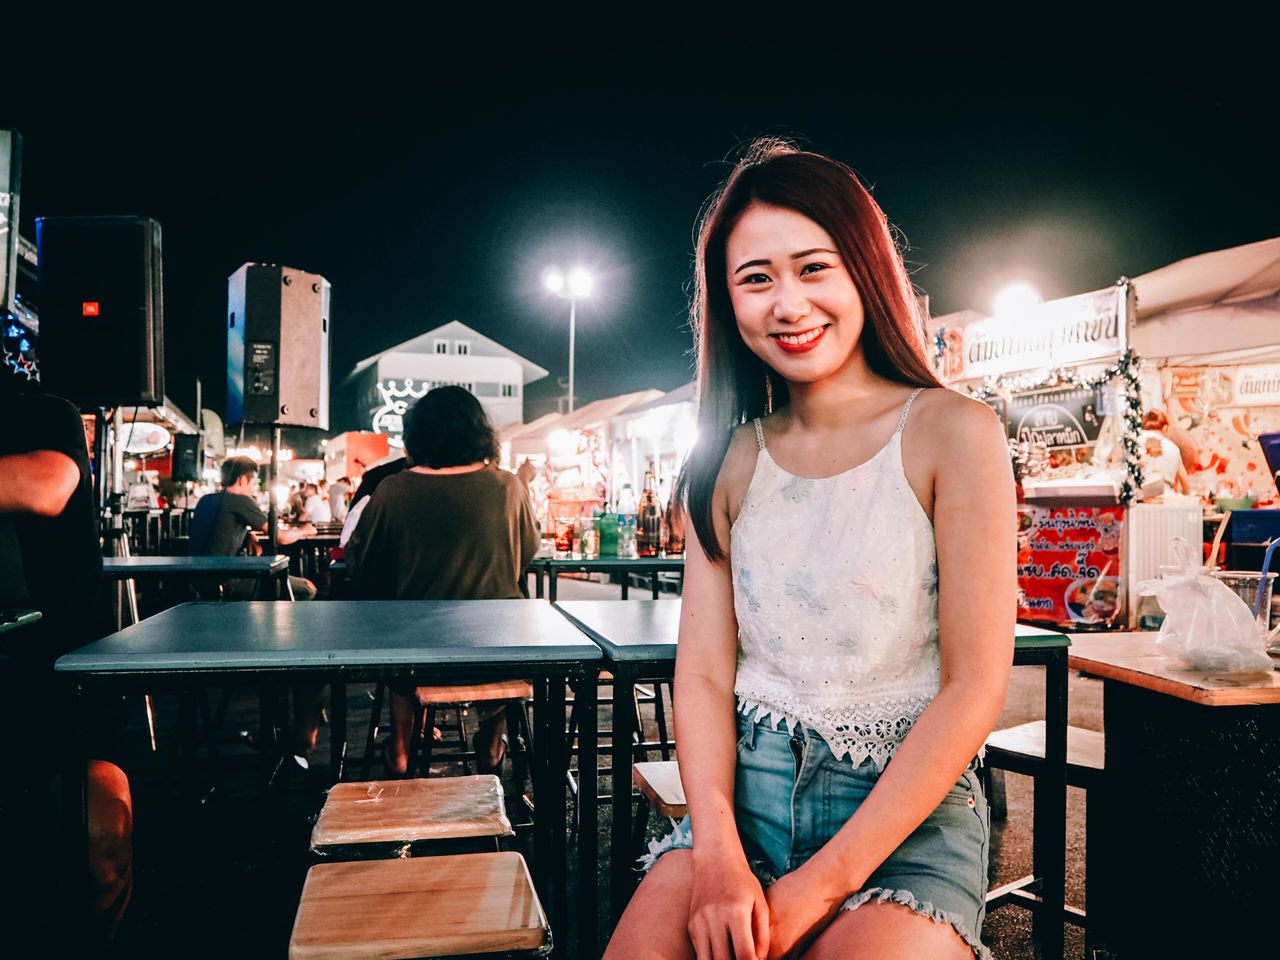 real people, lifestyles, looking at camera, night, smiling, young adult, one person, women, portrait, young women, leisure activity, standing, happiness, illuminated, casual clothing, incidental people, emotion, front view, waist up, hairstyle